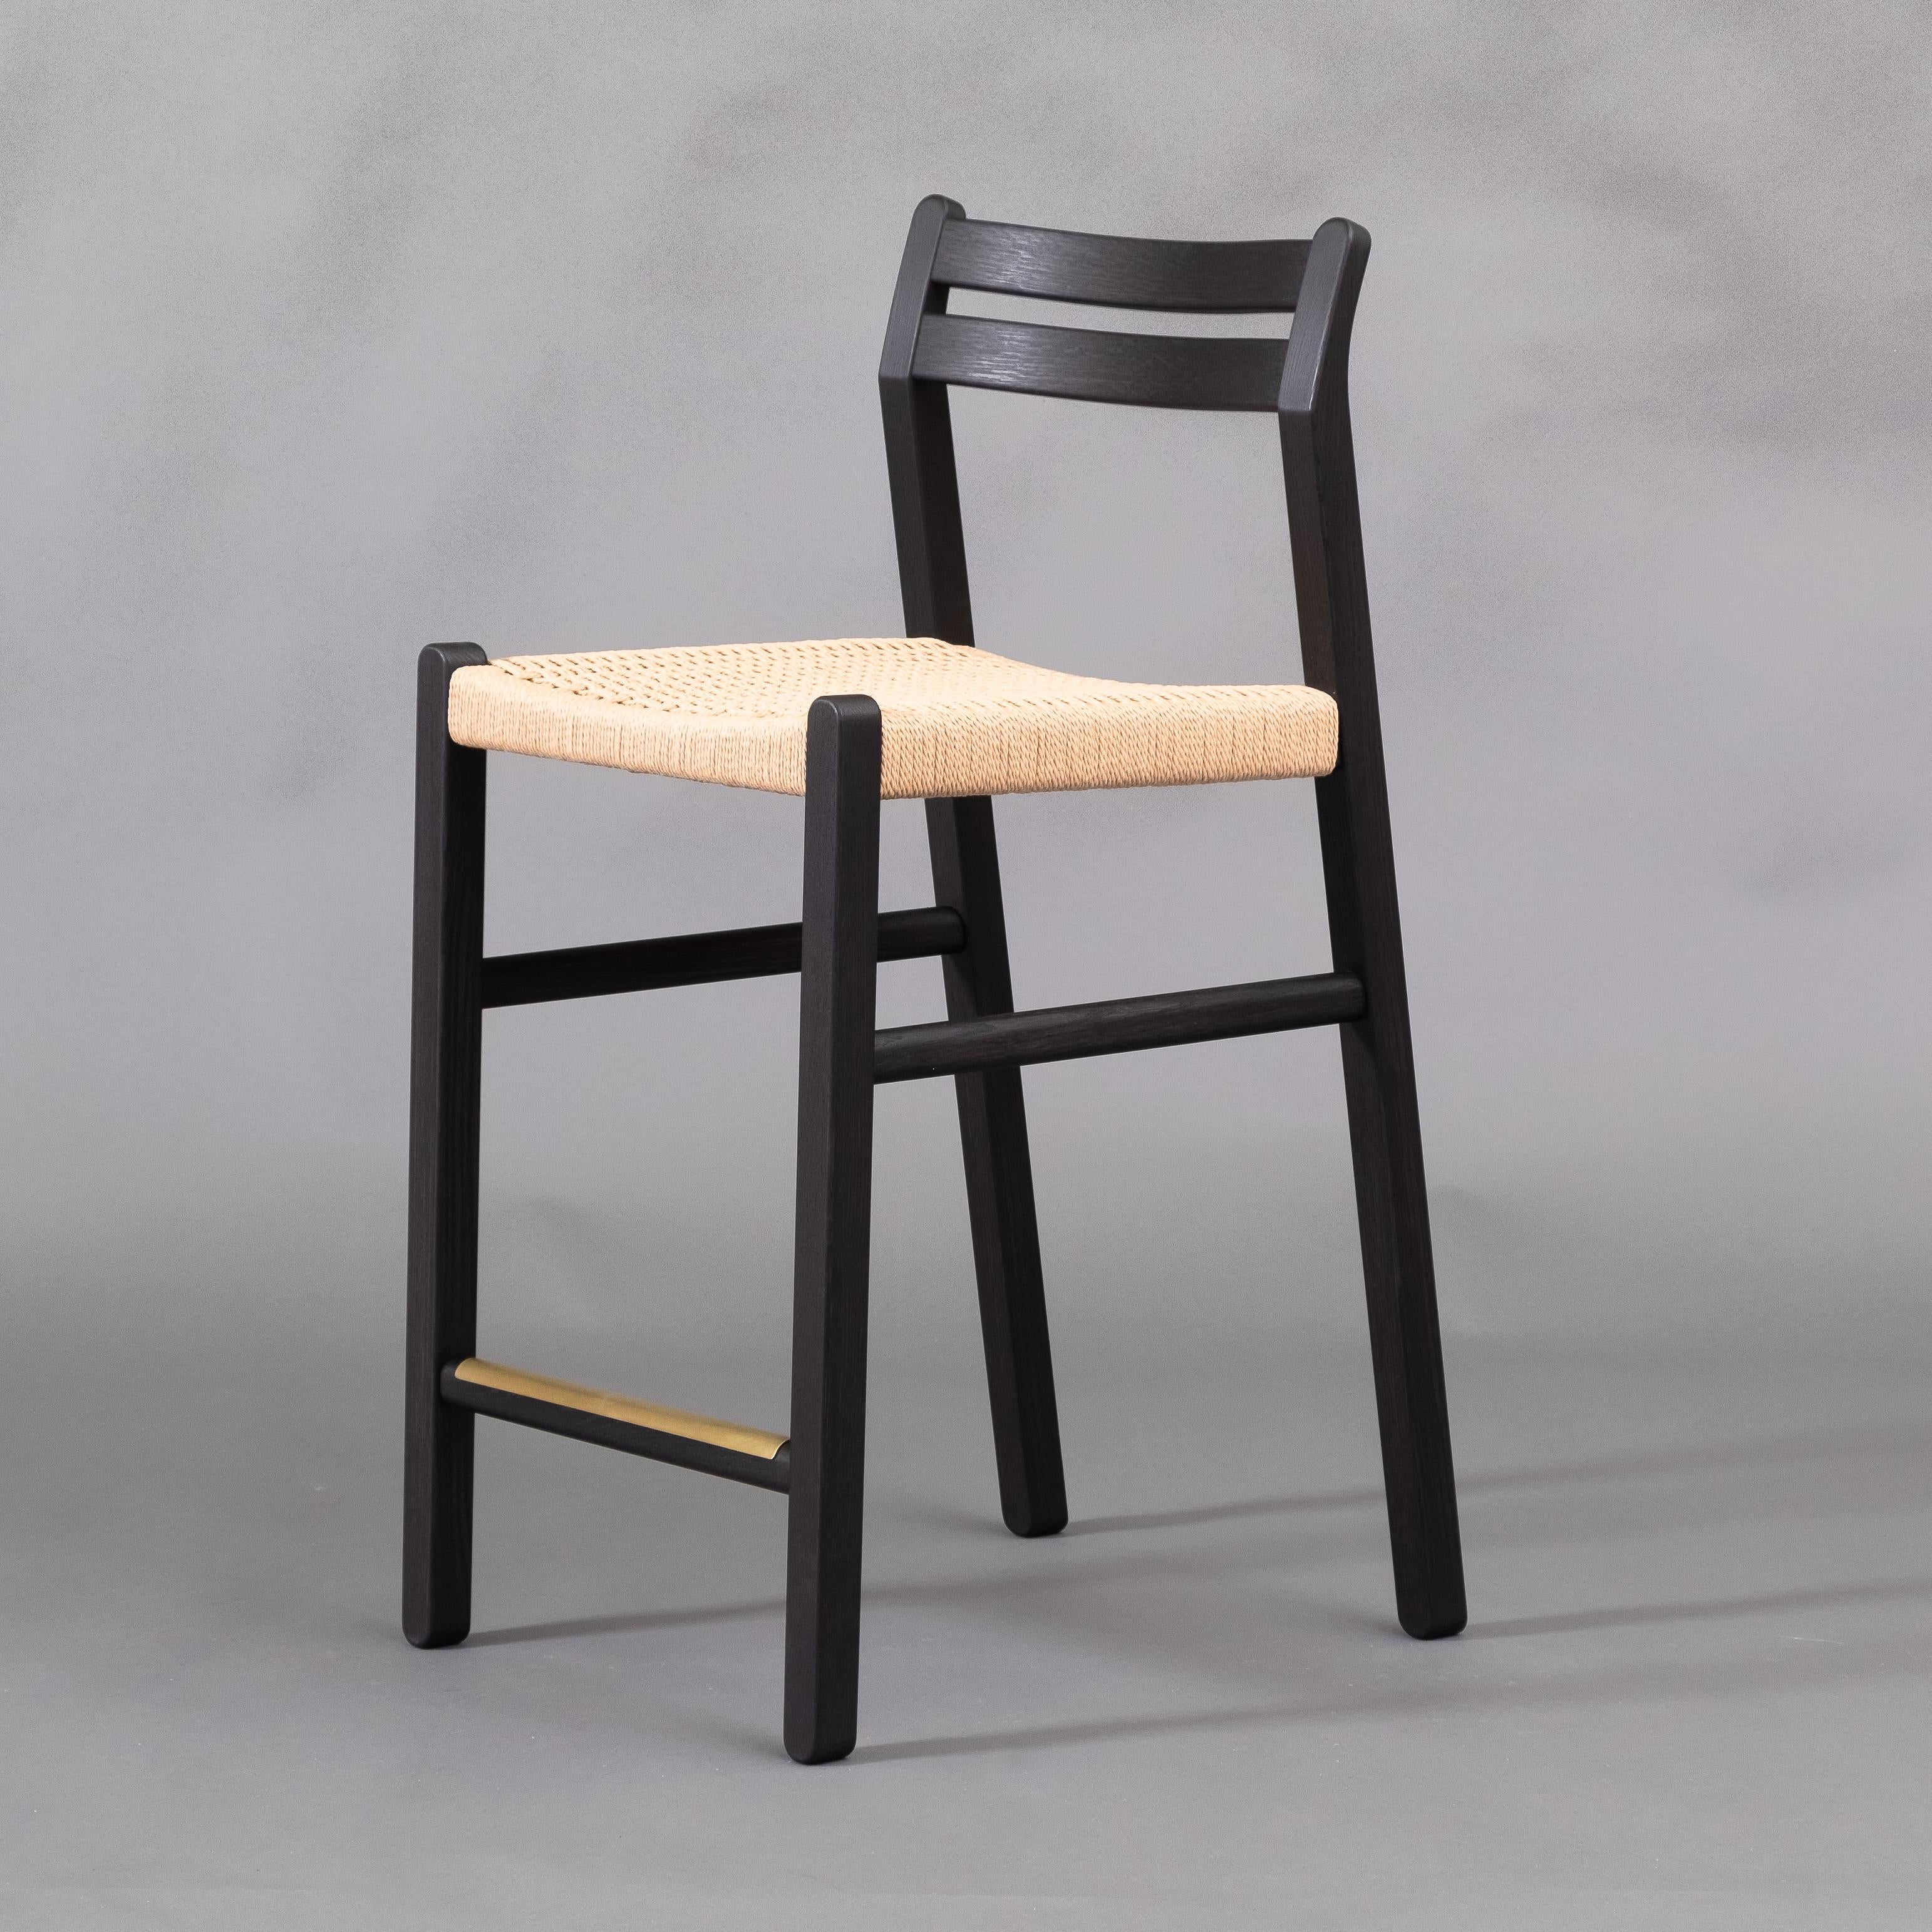 The Gladstone stool is a refined counter-height stool that blends a clean Mid-Century inspired aesthetic with traditional materials and joinery techniques. Each piece is handcrafted to order in our Ottawa studio.

The Gladstone is built using